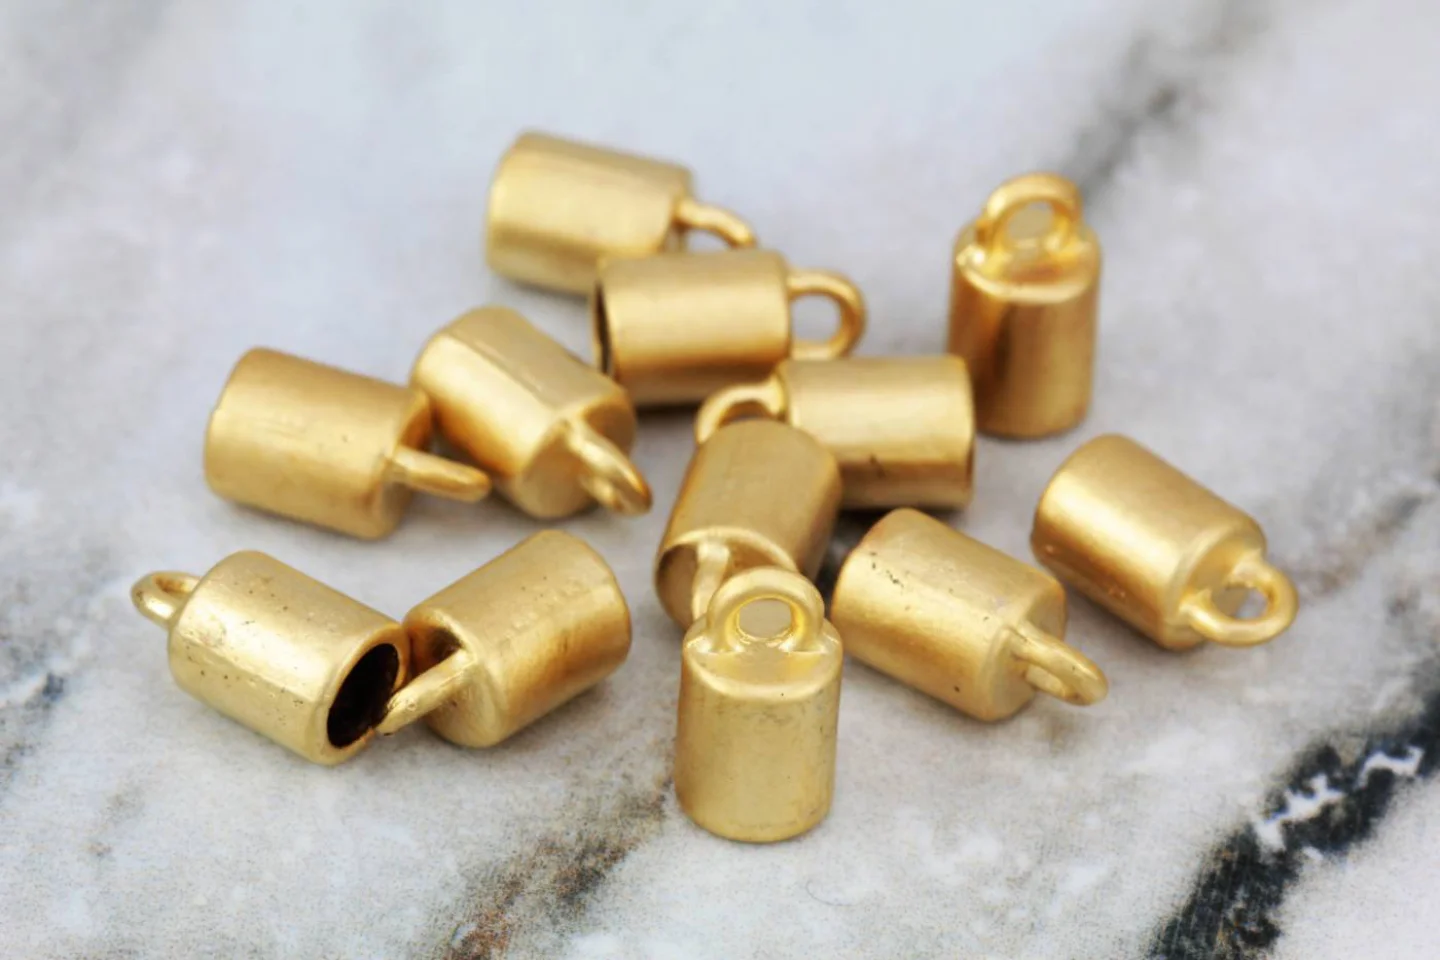 gold-metal-round-4mm-hole-end-caps.